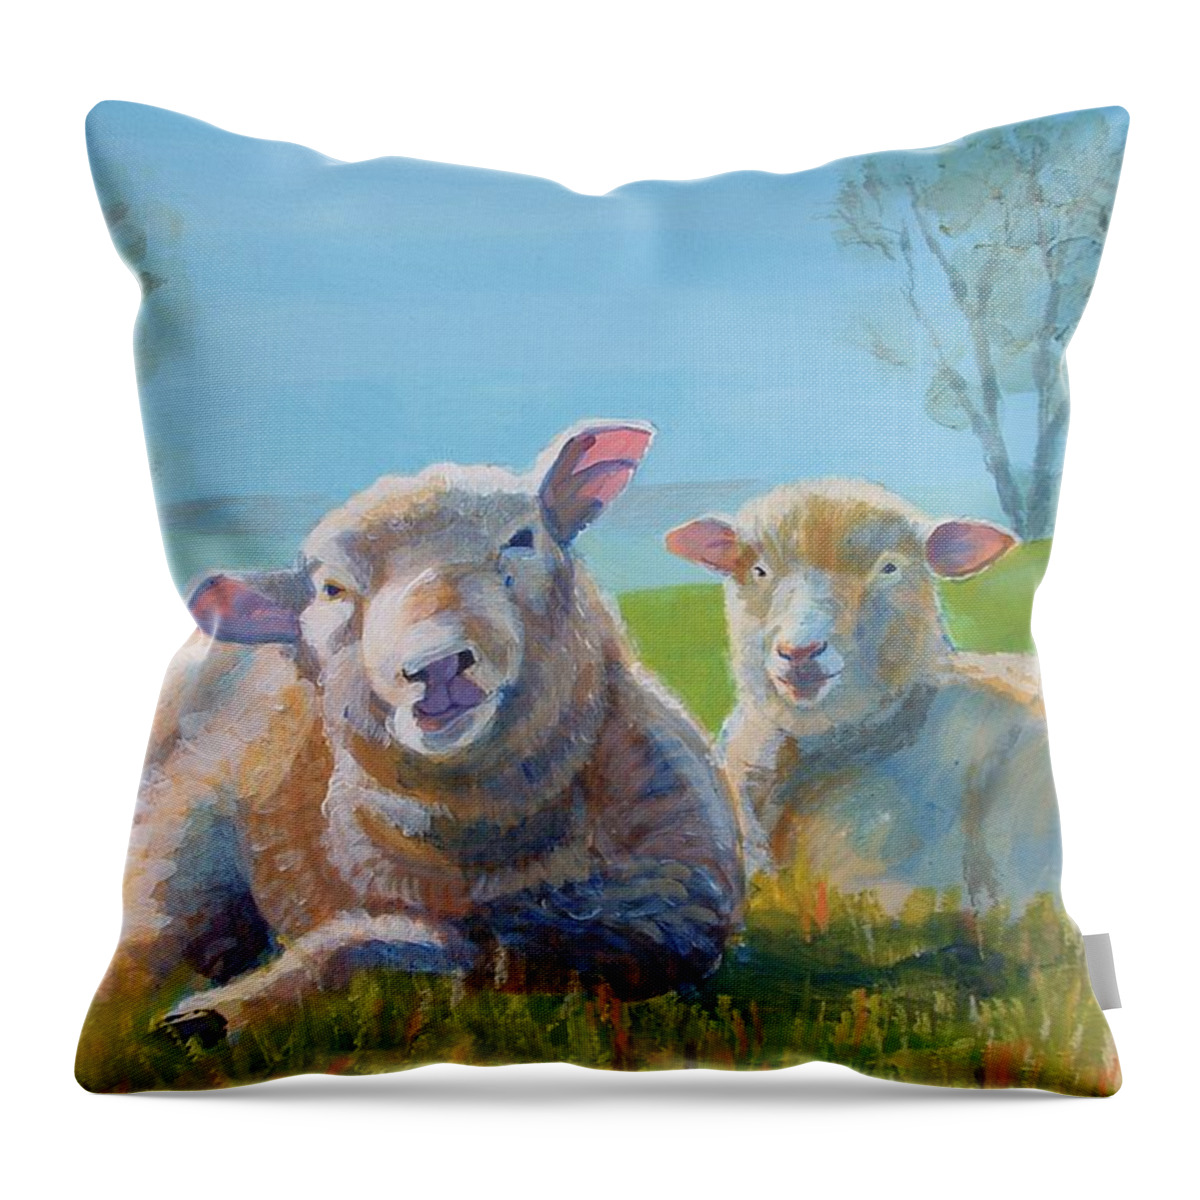 Sheep Throw Pillow featuring the painting Sheep Lying Down by Mike Jory